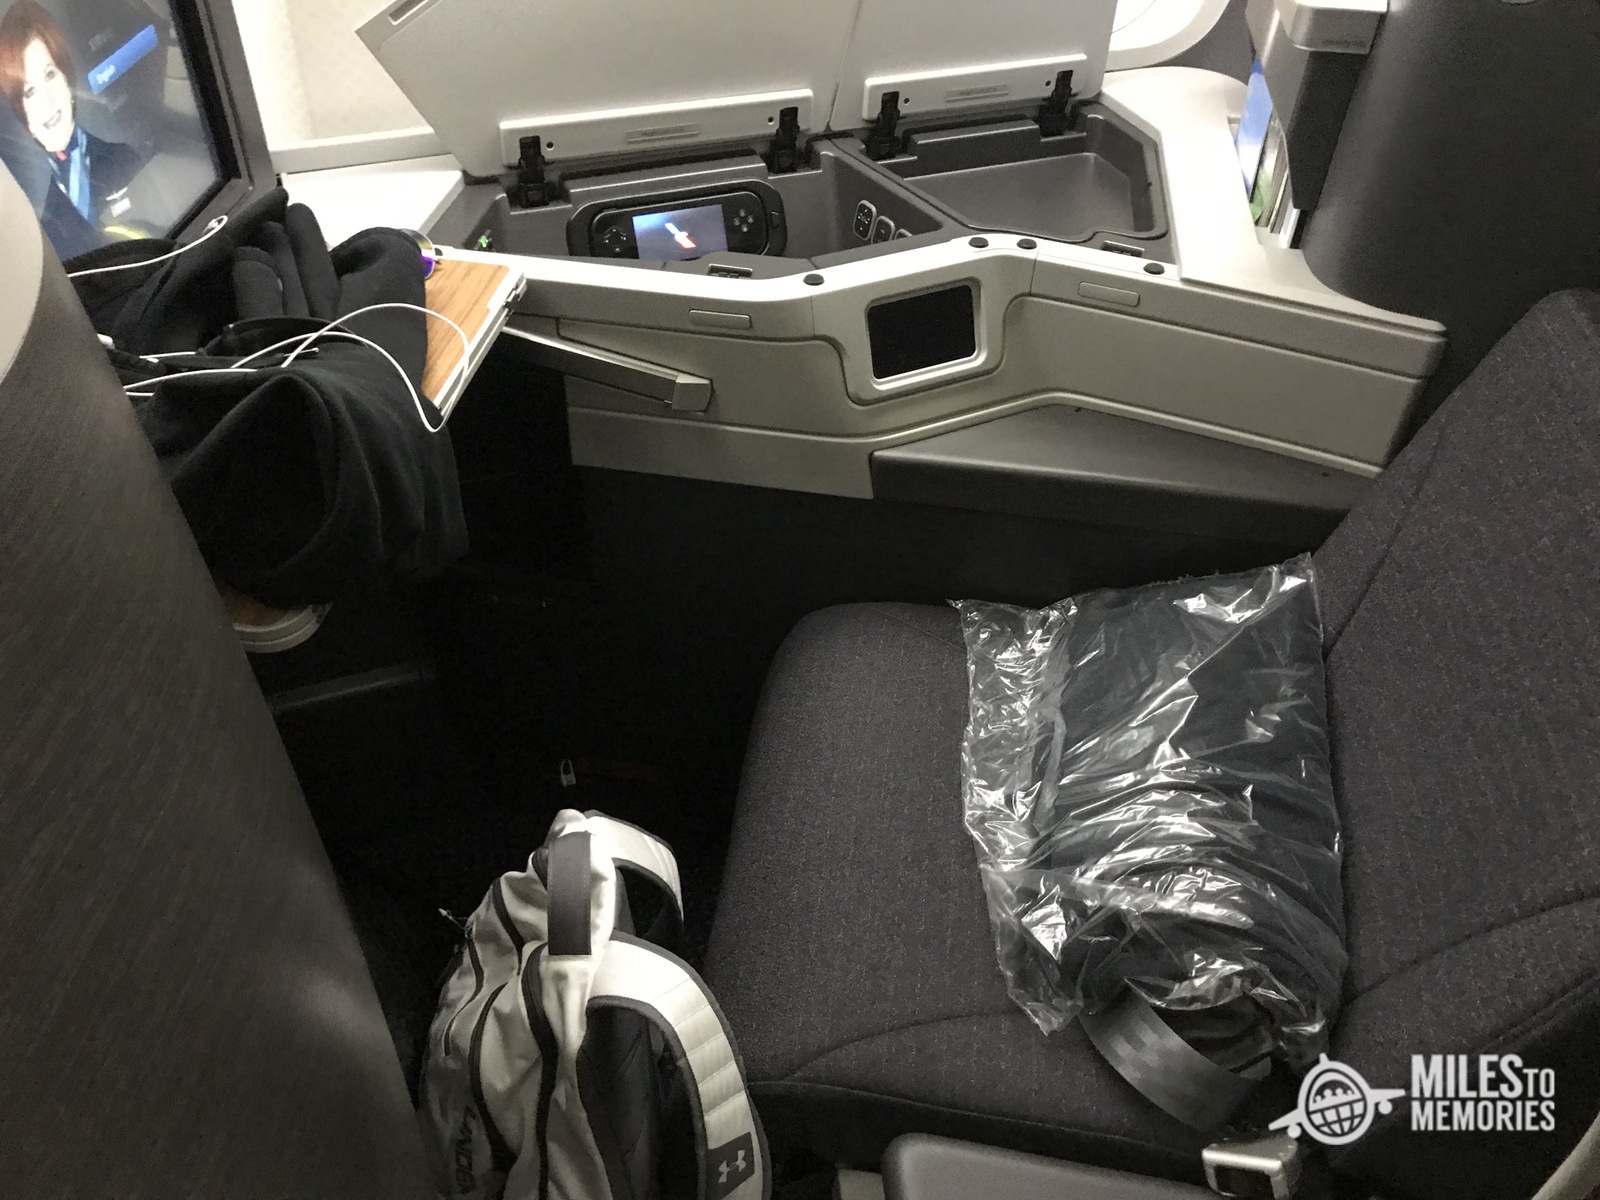 American's Domestic Business Lie Flat Seats Review